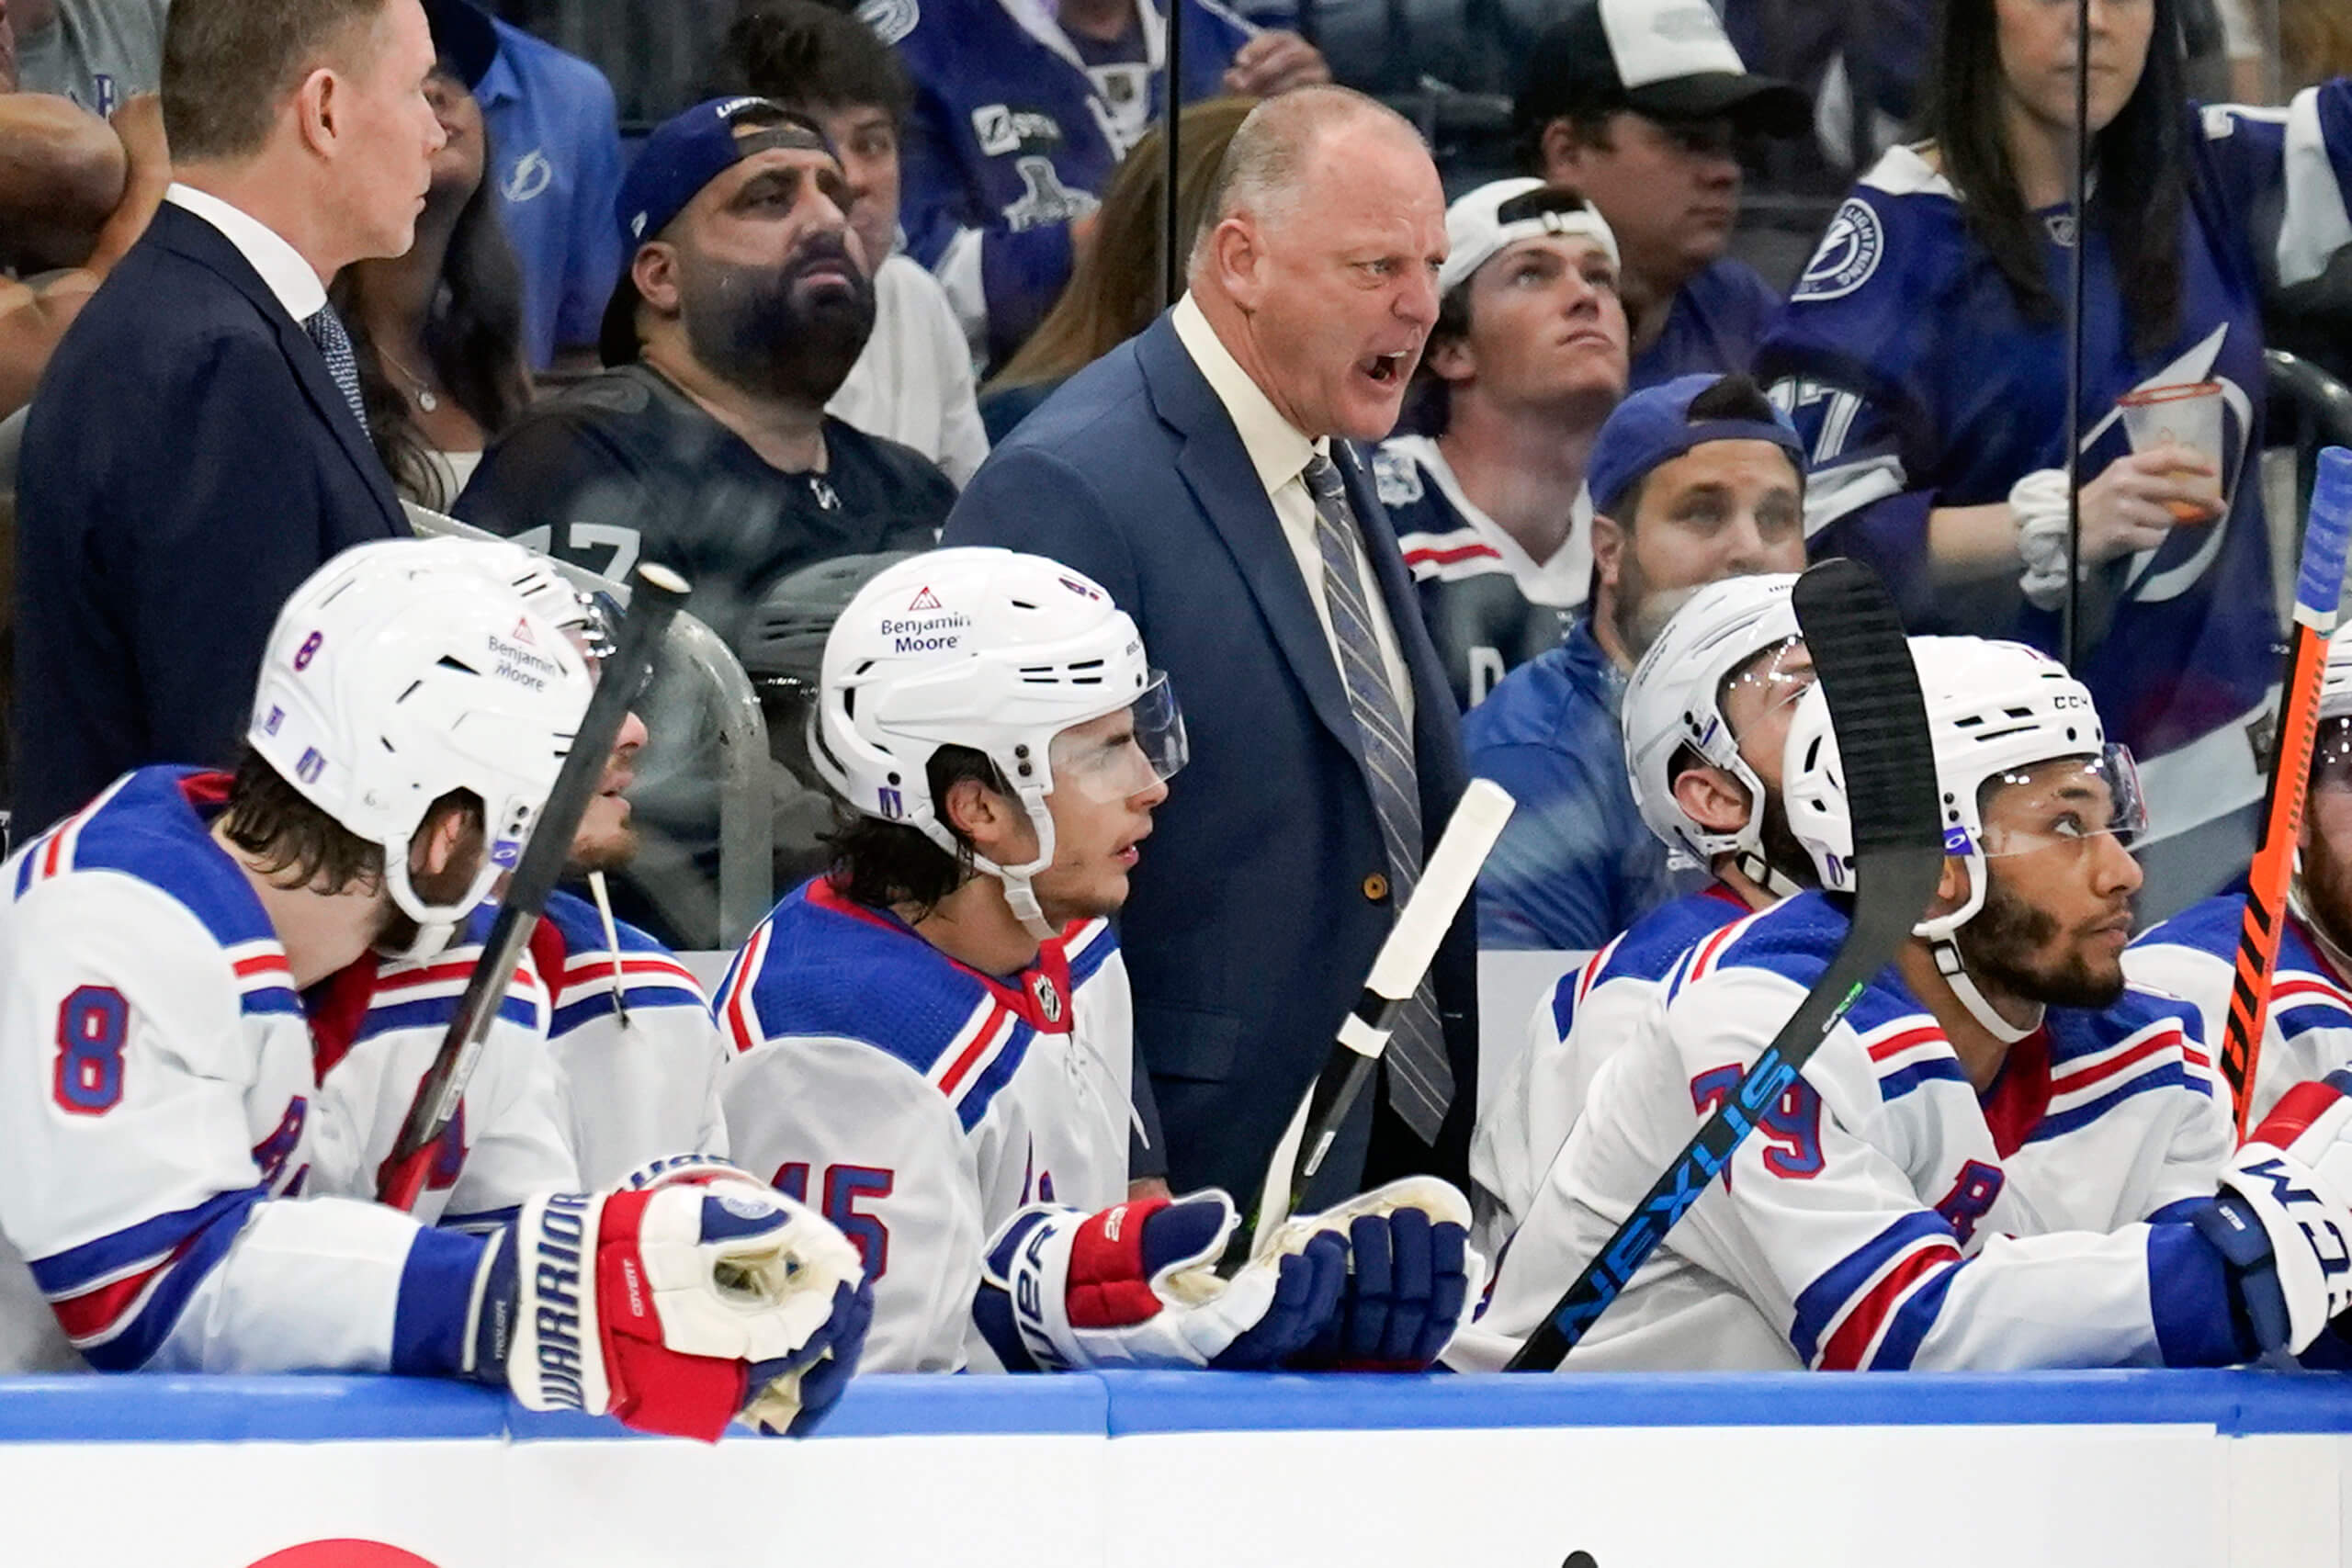 Rangers' coach does it his way